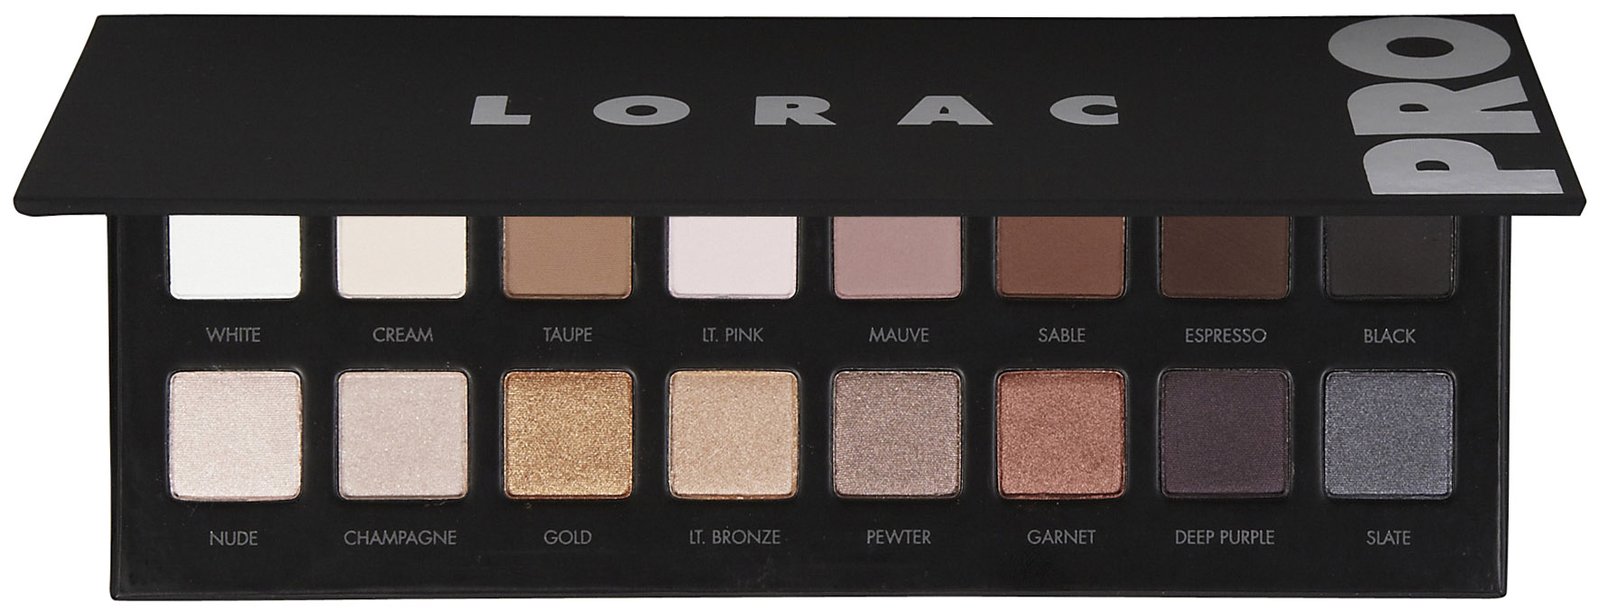 Get Rebel Eyes with the LORAC PRO Palette.